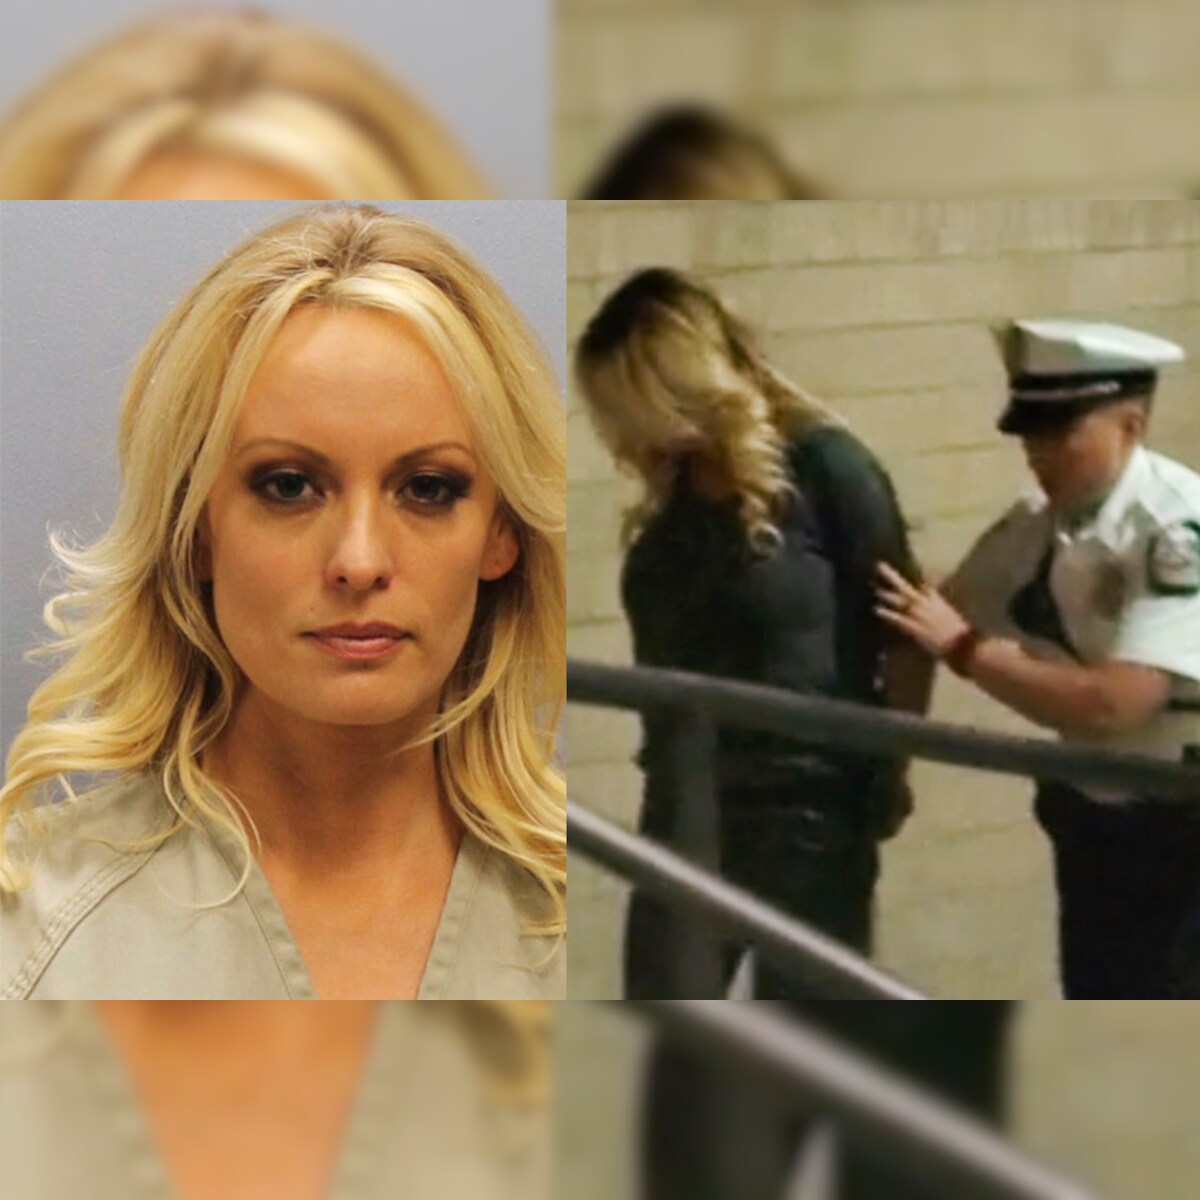 Bengali Xxx Polis - Police Say They Made an 'Error' in Arresting Porn Star Stormy Daniels, Drop  Charges